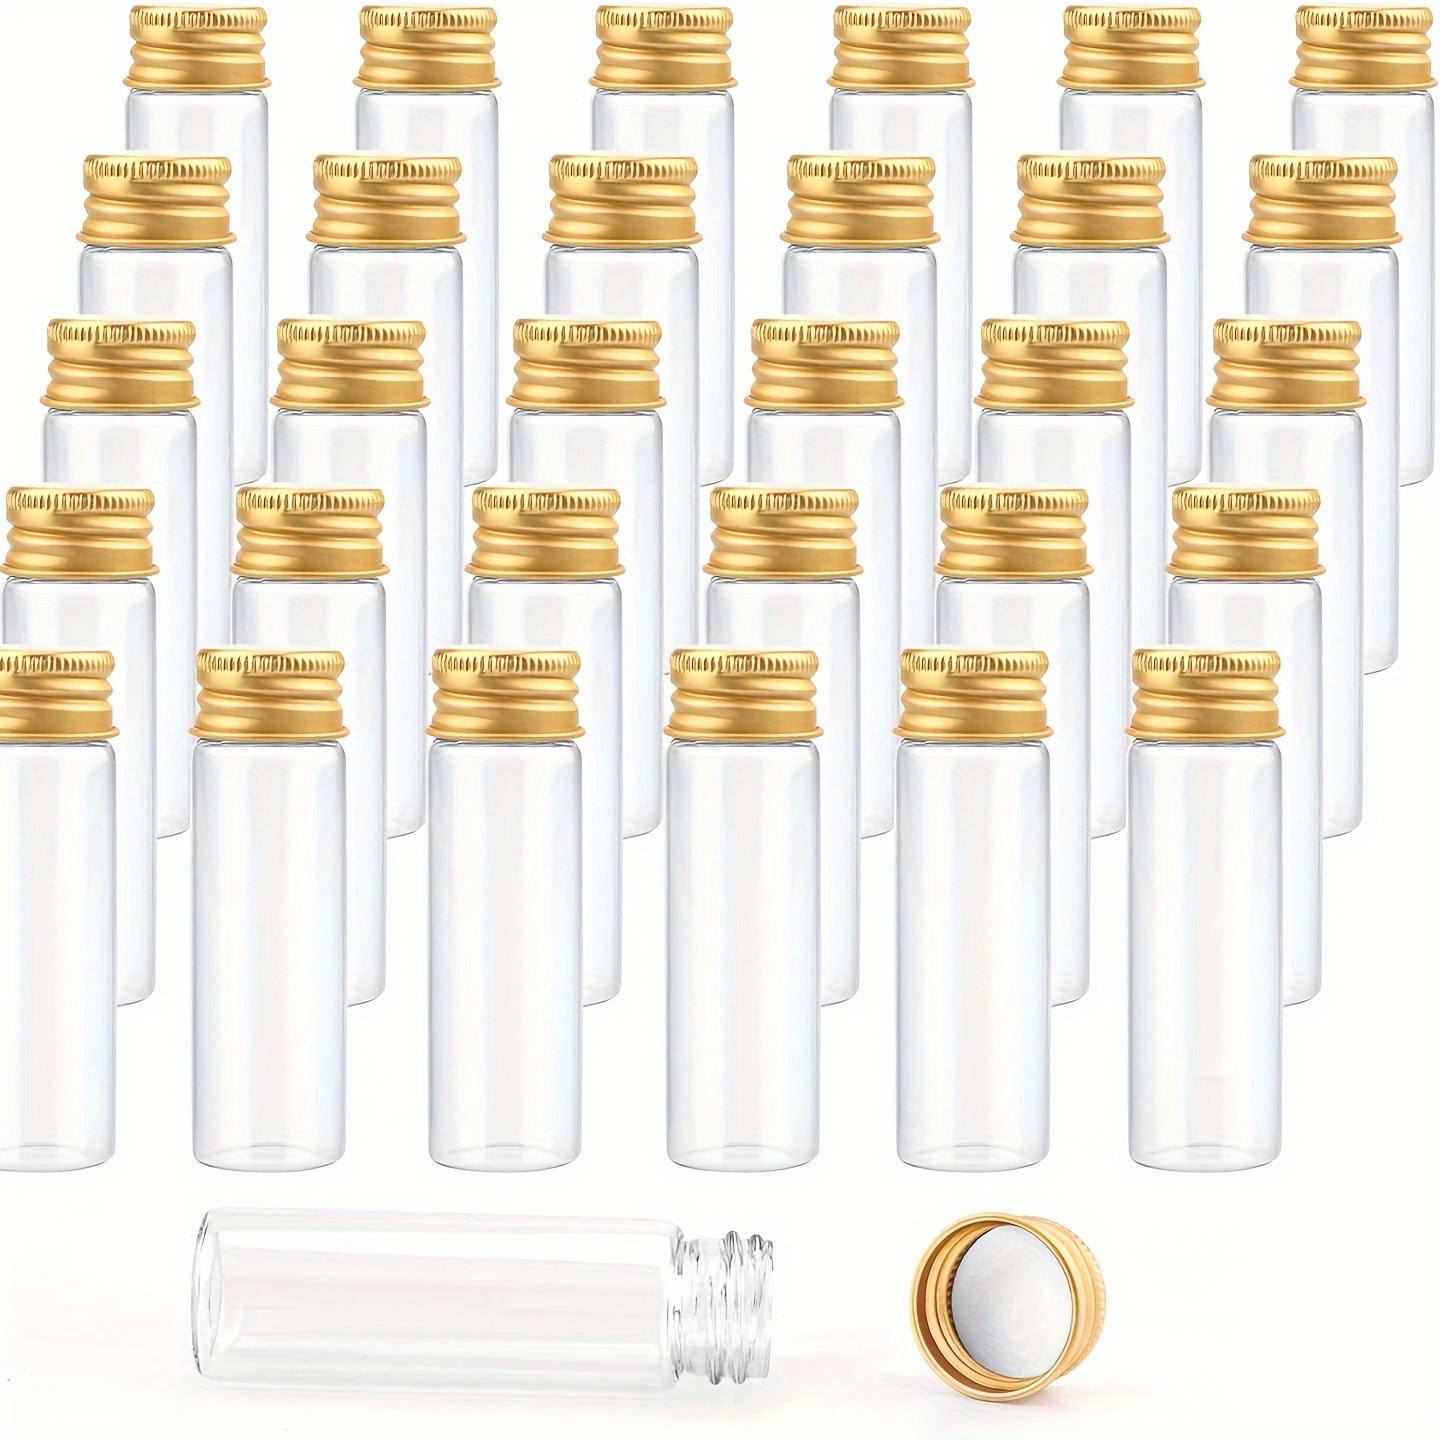 

10pcs 20ml Clear Plastic Test Tubes With Golden Screw Caps, Mini Bottles For Essential Oils, Liquids, Powders, Jewelry Beads, Wish Messages, Candy, Diy Decorations & Party Favors